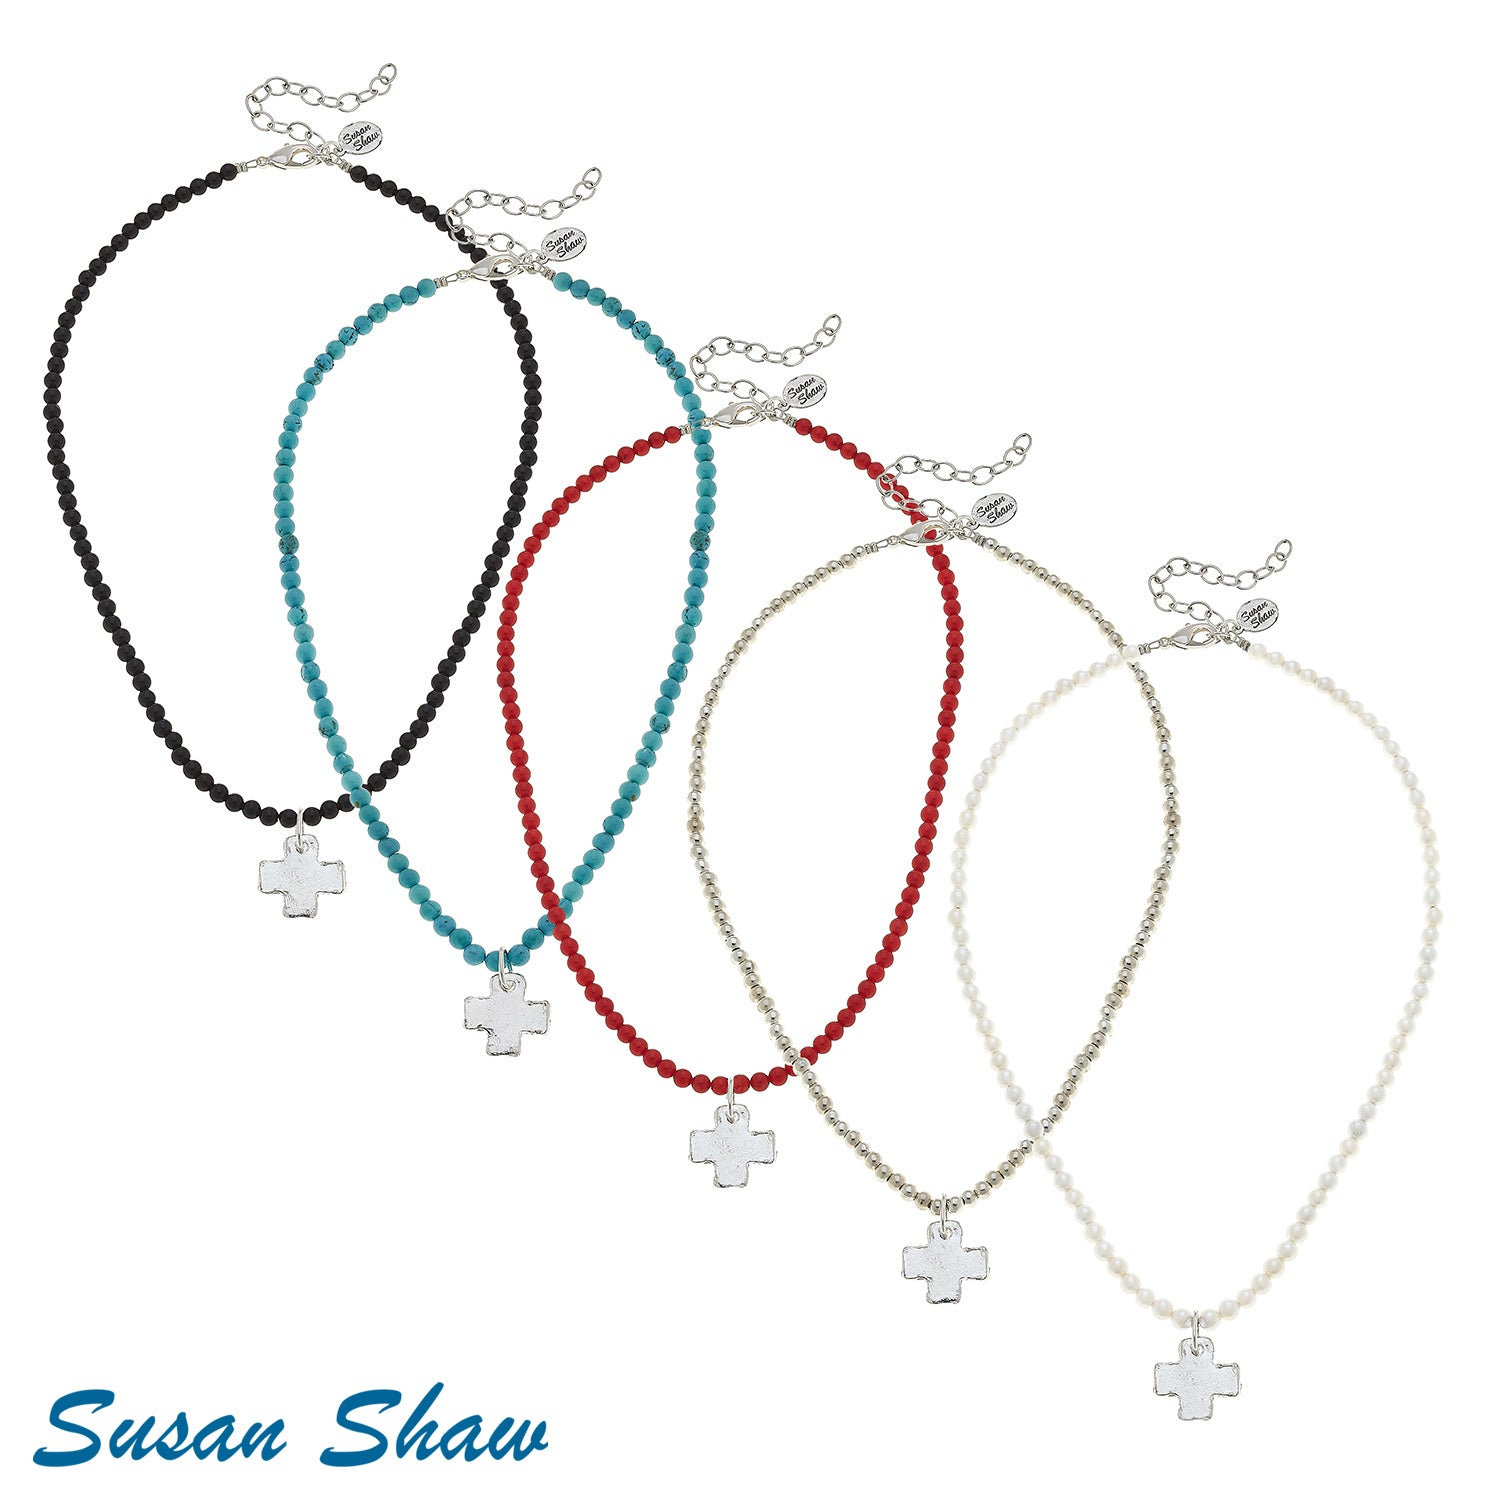 Susan Shaw Assorted Cross Necklaces in Silver.